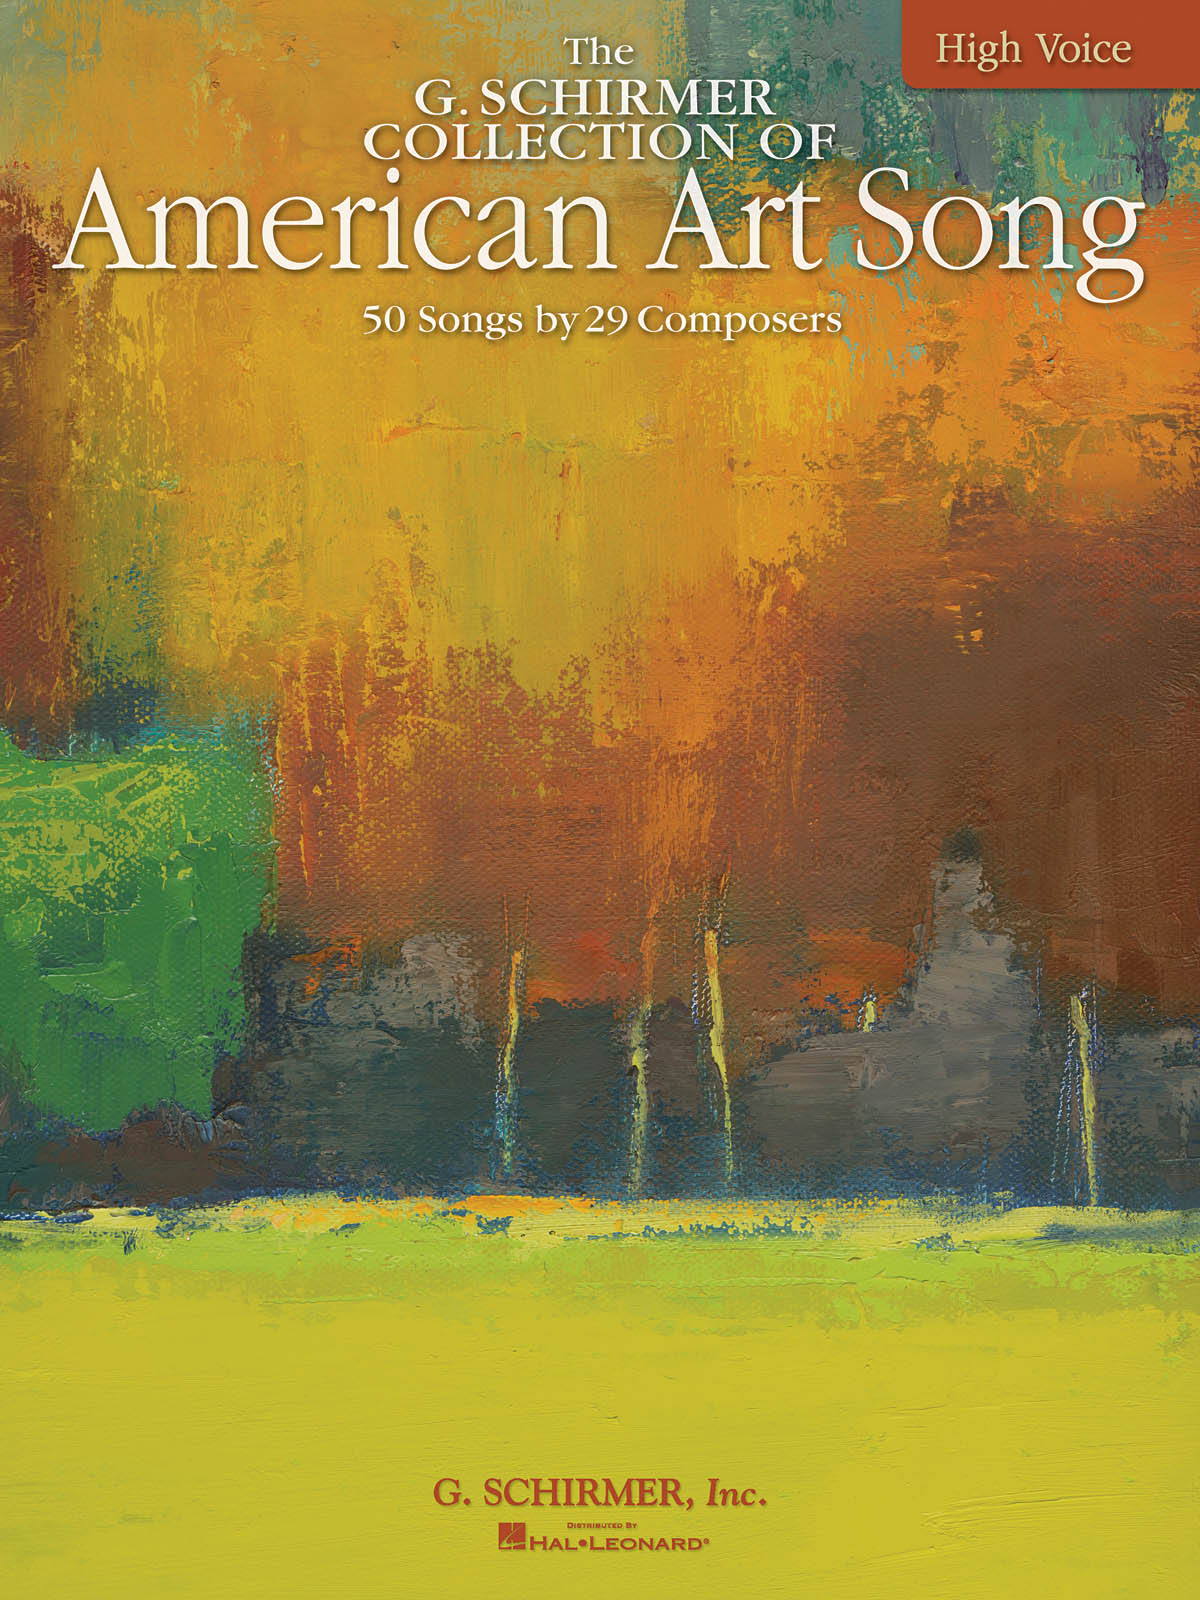 The G. Schirmer Collection of American Art Song: High Voice: Vocal Album